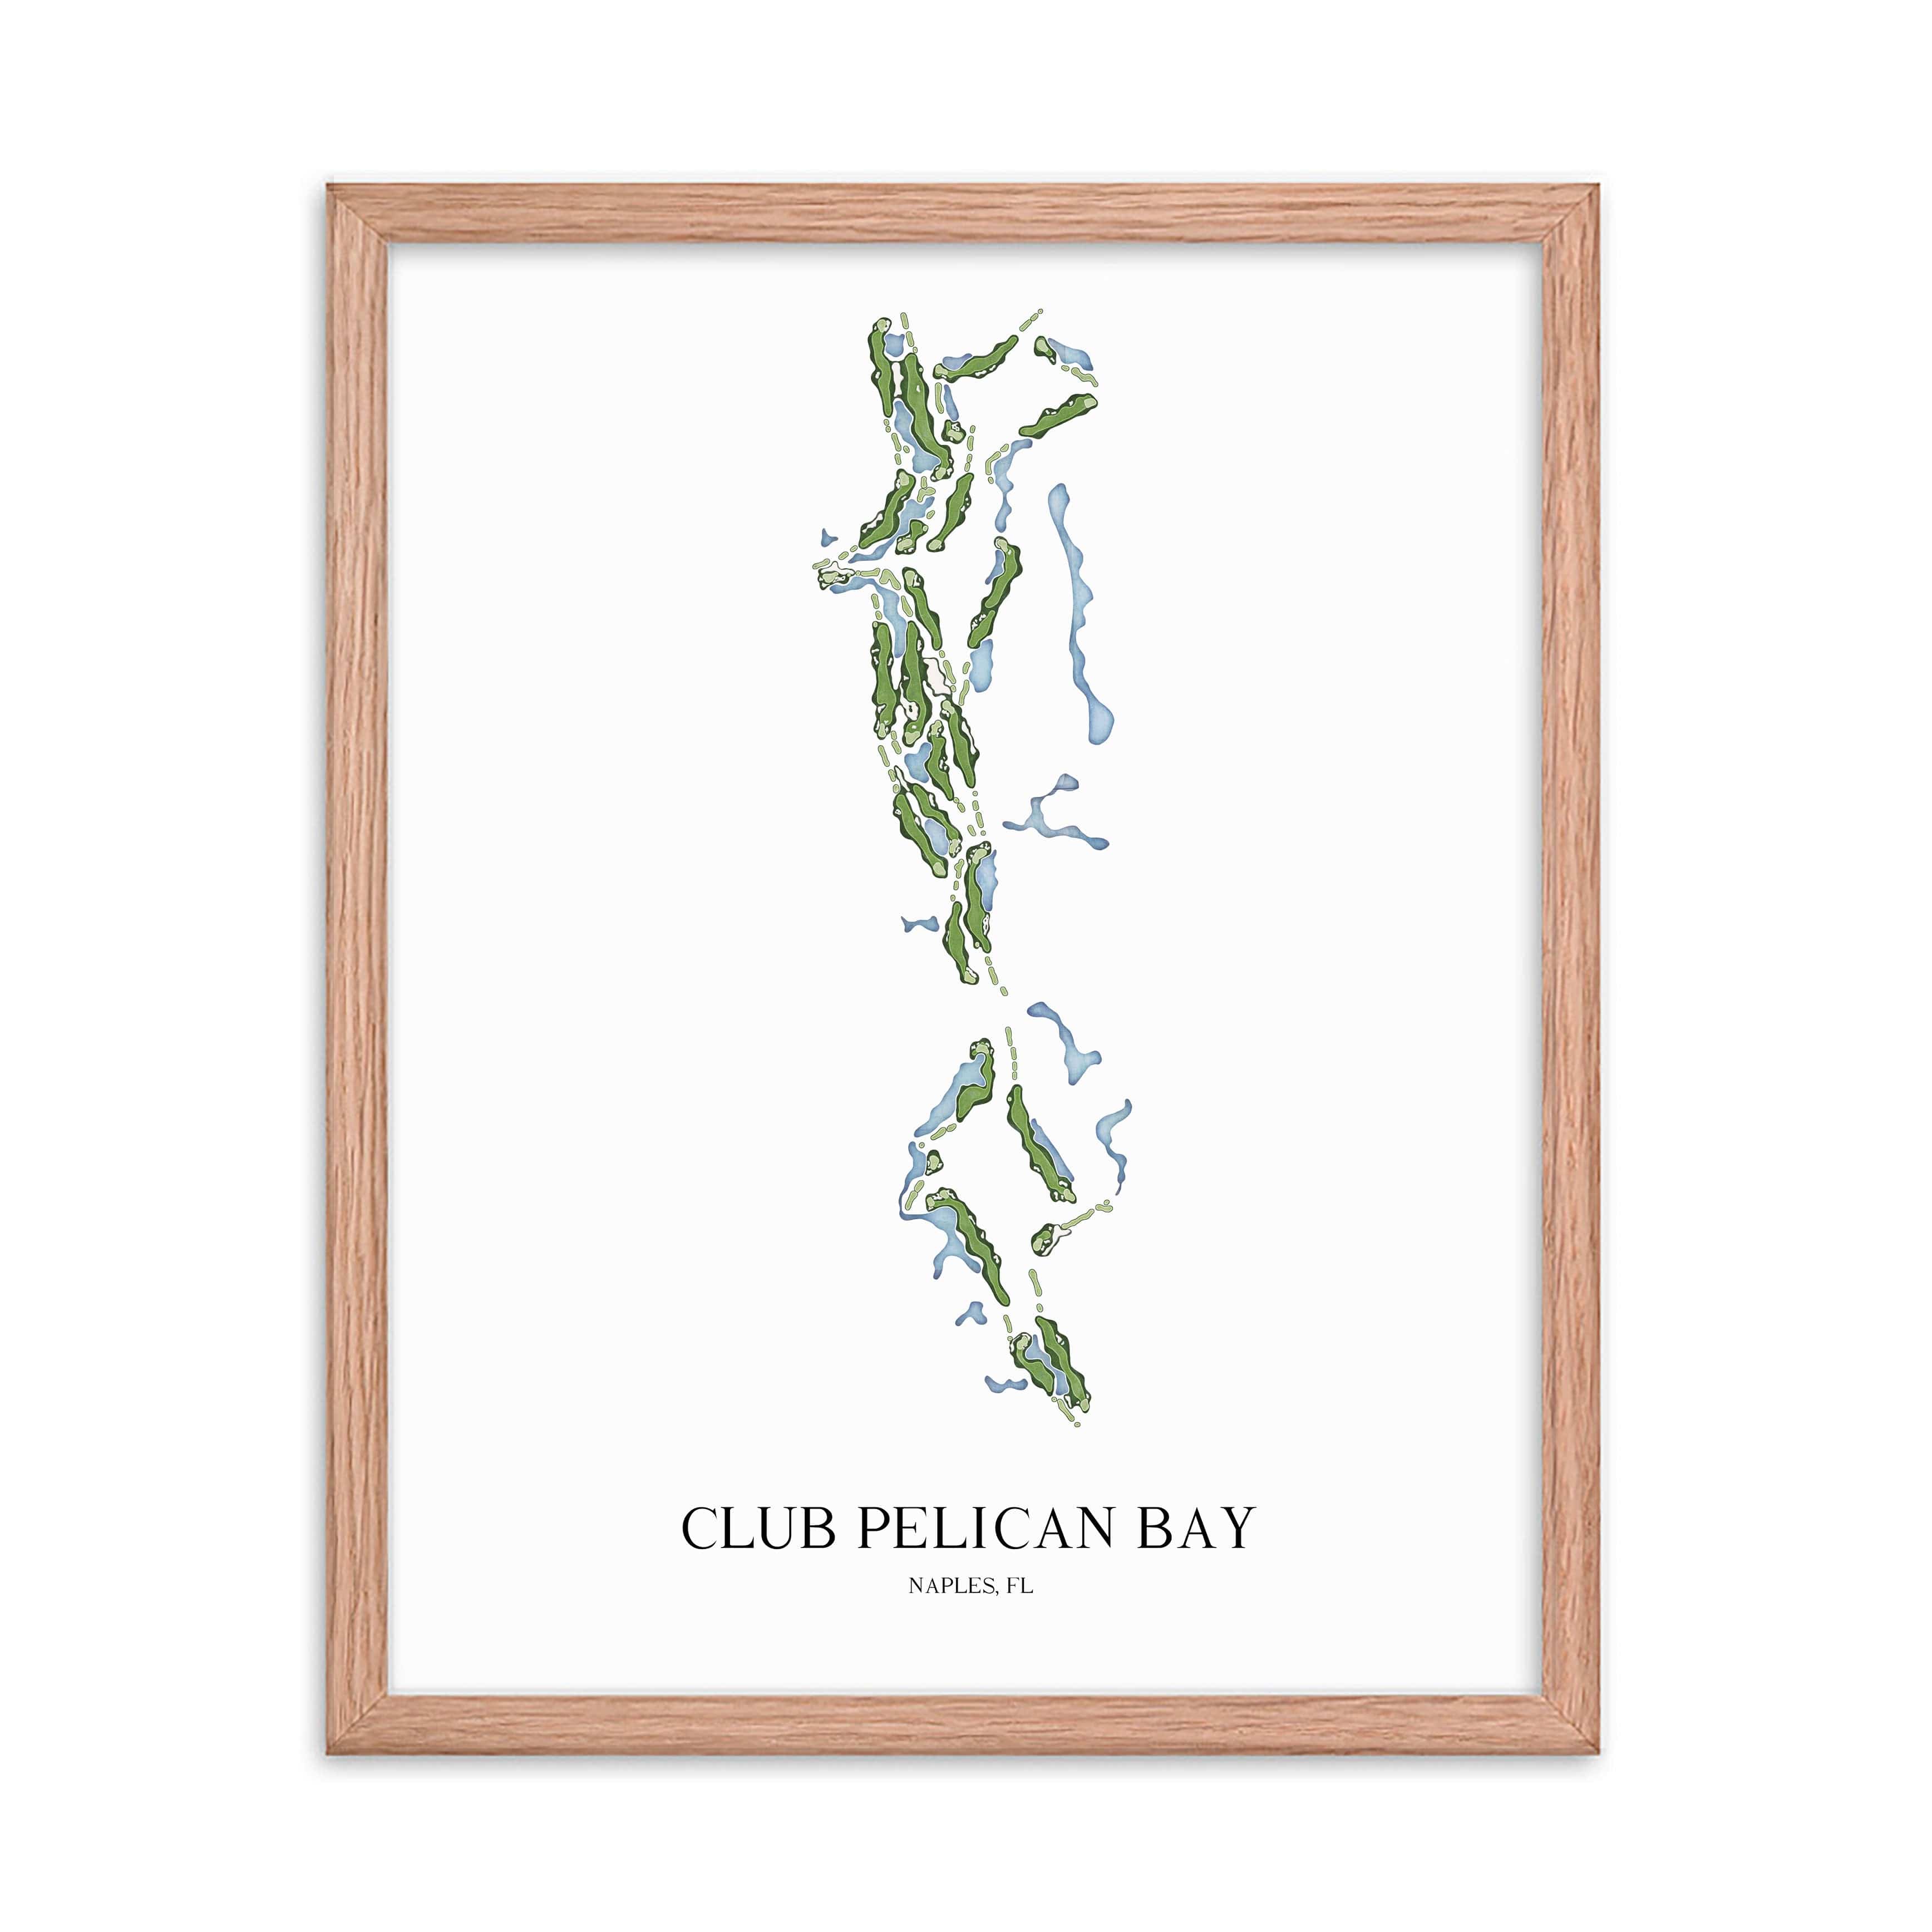 The 19th Hole Golf Shop - Golf Course Prints -  Club Pelican Bay Golf Course Map